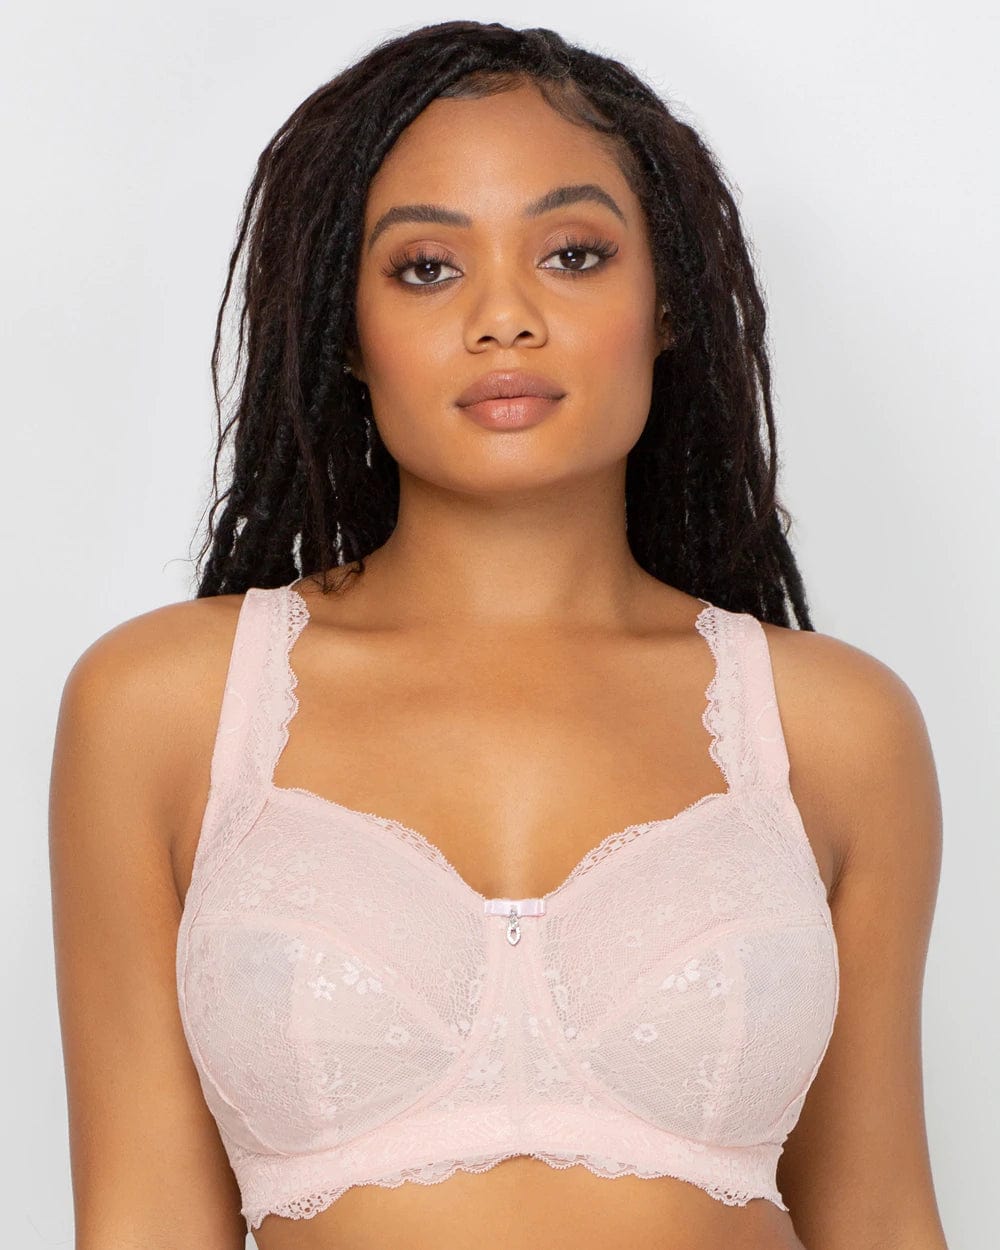 Luxe Lace Wireless Bra - Black Hue - Chérie Amour